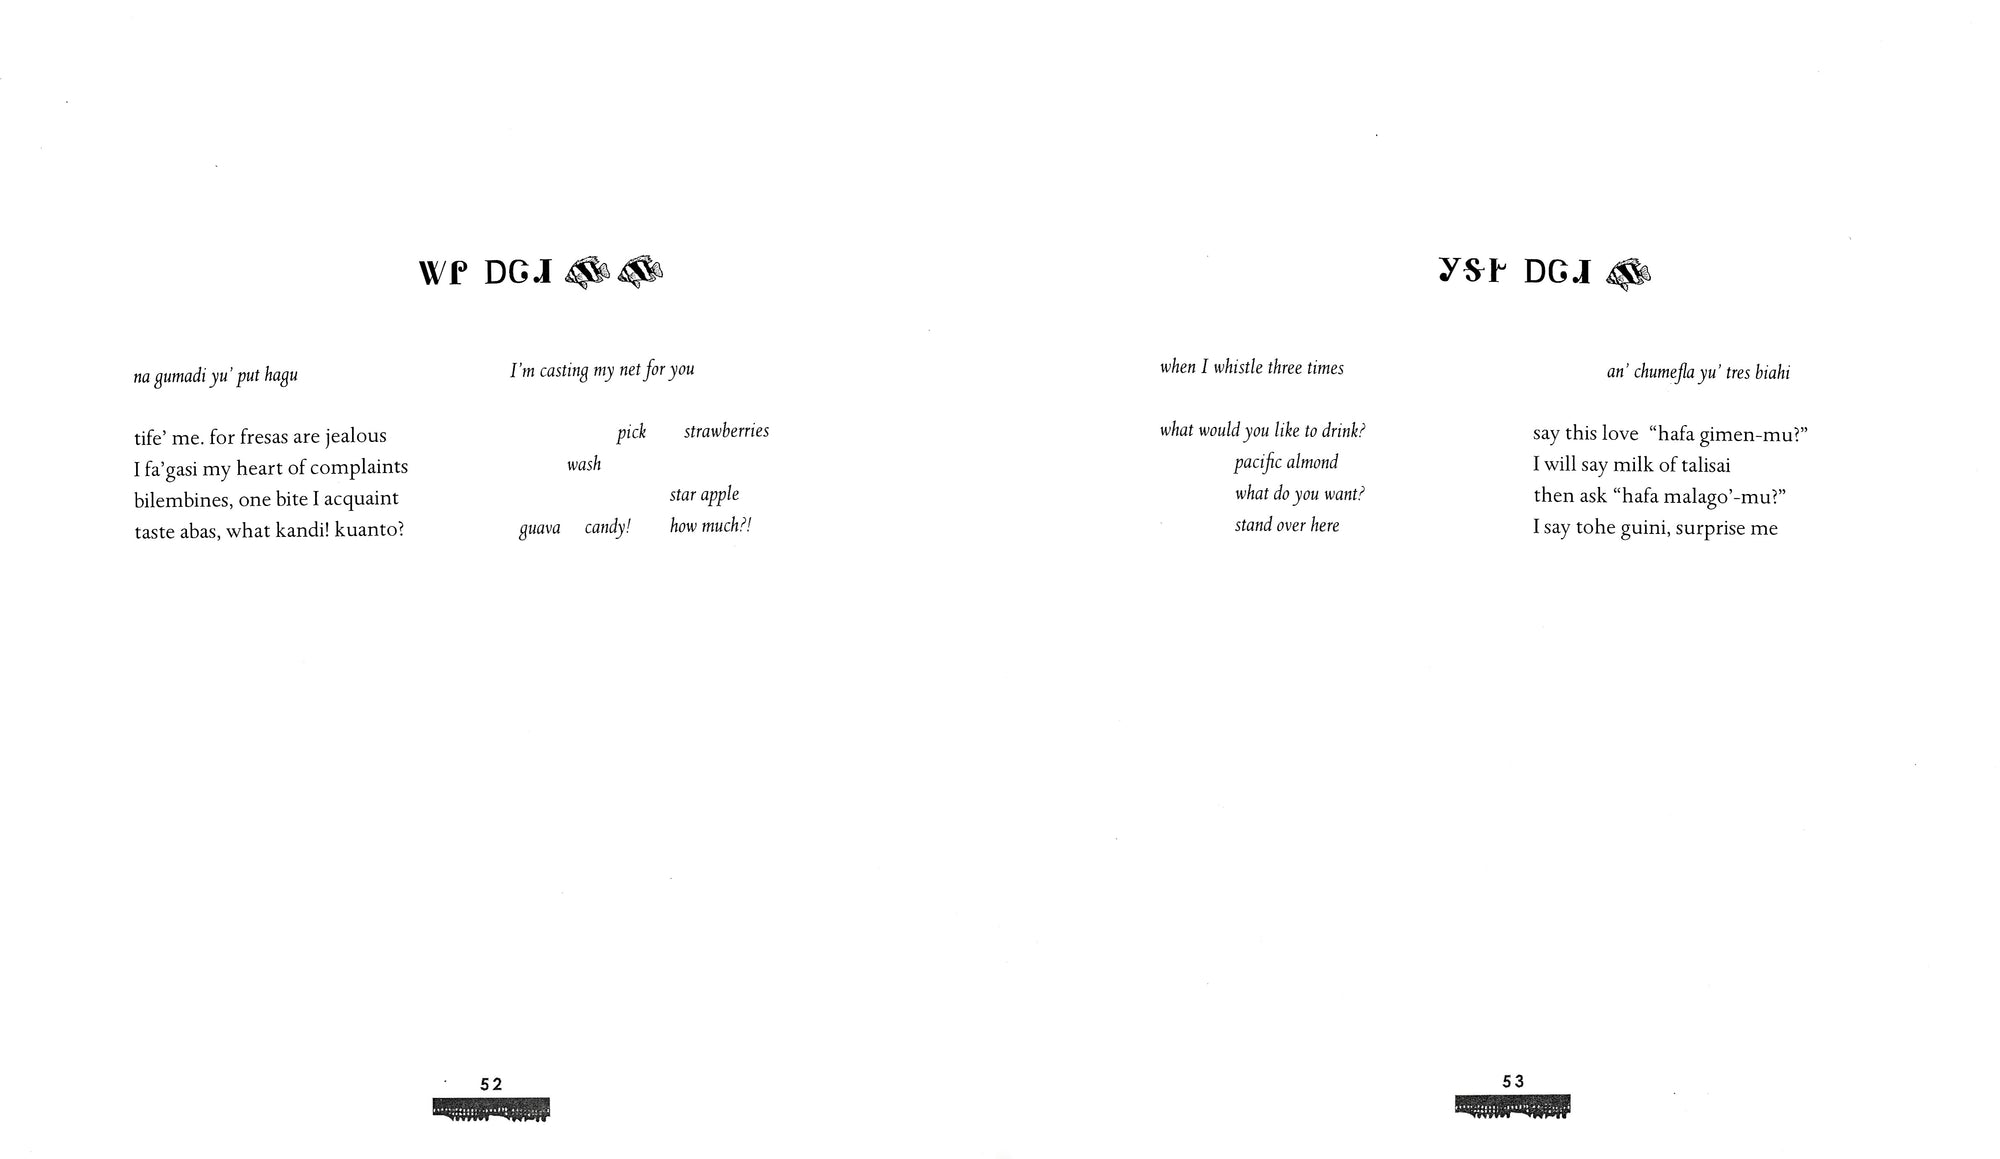 Book spread in white with small interrupted columns of text in both roman and italic serif black writing. The titles on both sides consist of letters alongside little pictograms of fish.